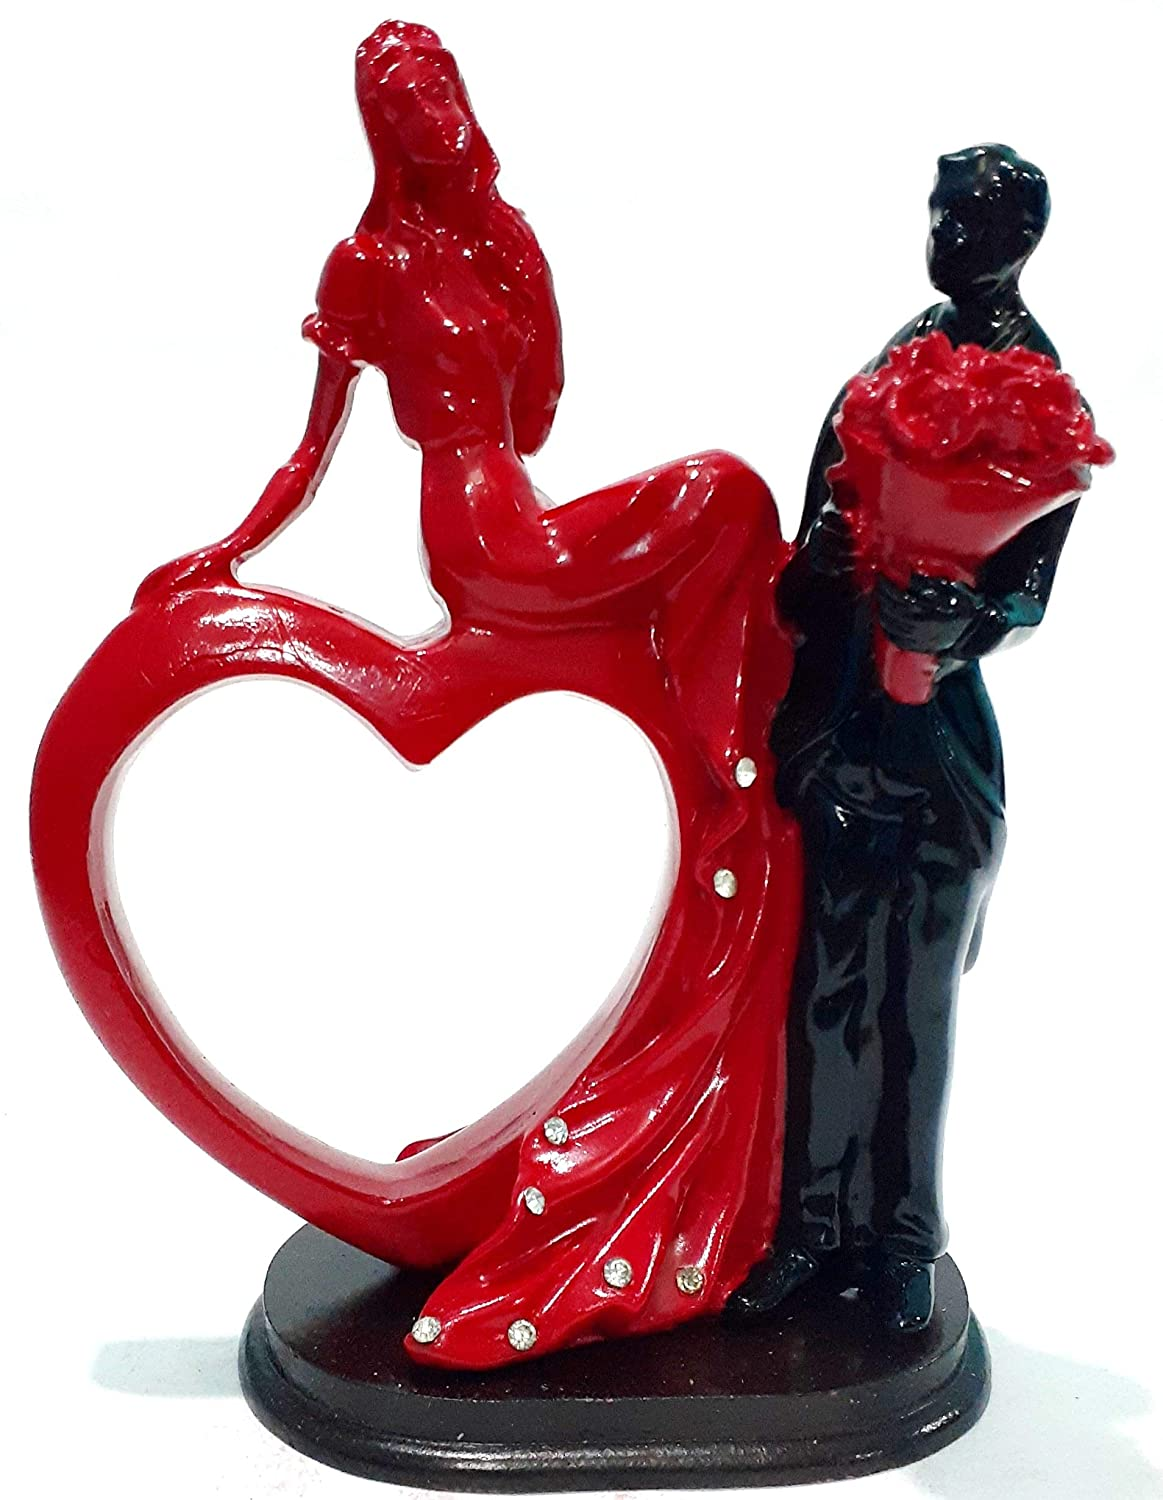 Amazon.com: SAMINDS Couple Sculpture Art Iron, for Couple, Couple Gifts, Wedding  Gifts, Romantic Metal Ornament Figurine Love Statue for Home Decor, Wedding,  Bookshelf, Table (Holding Hands and Kissing) : Home & Kitchen